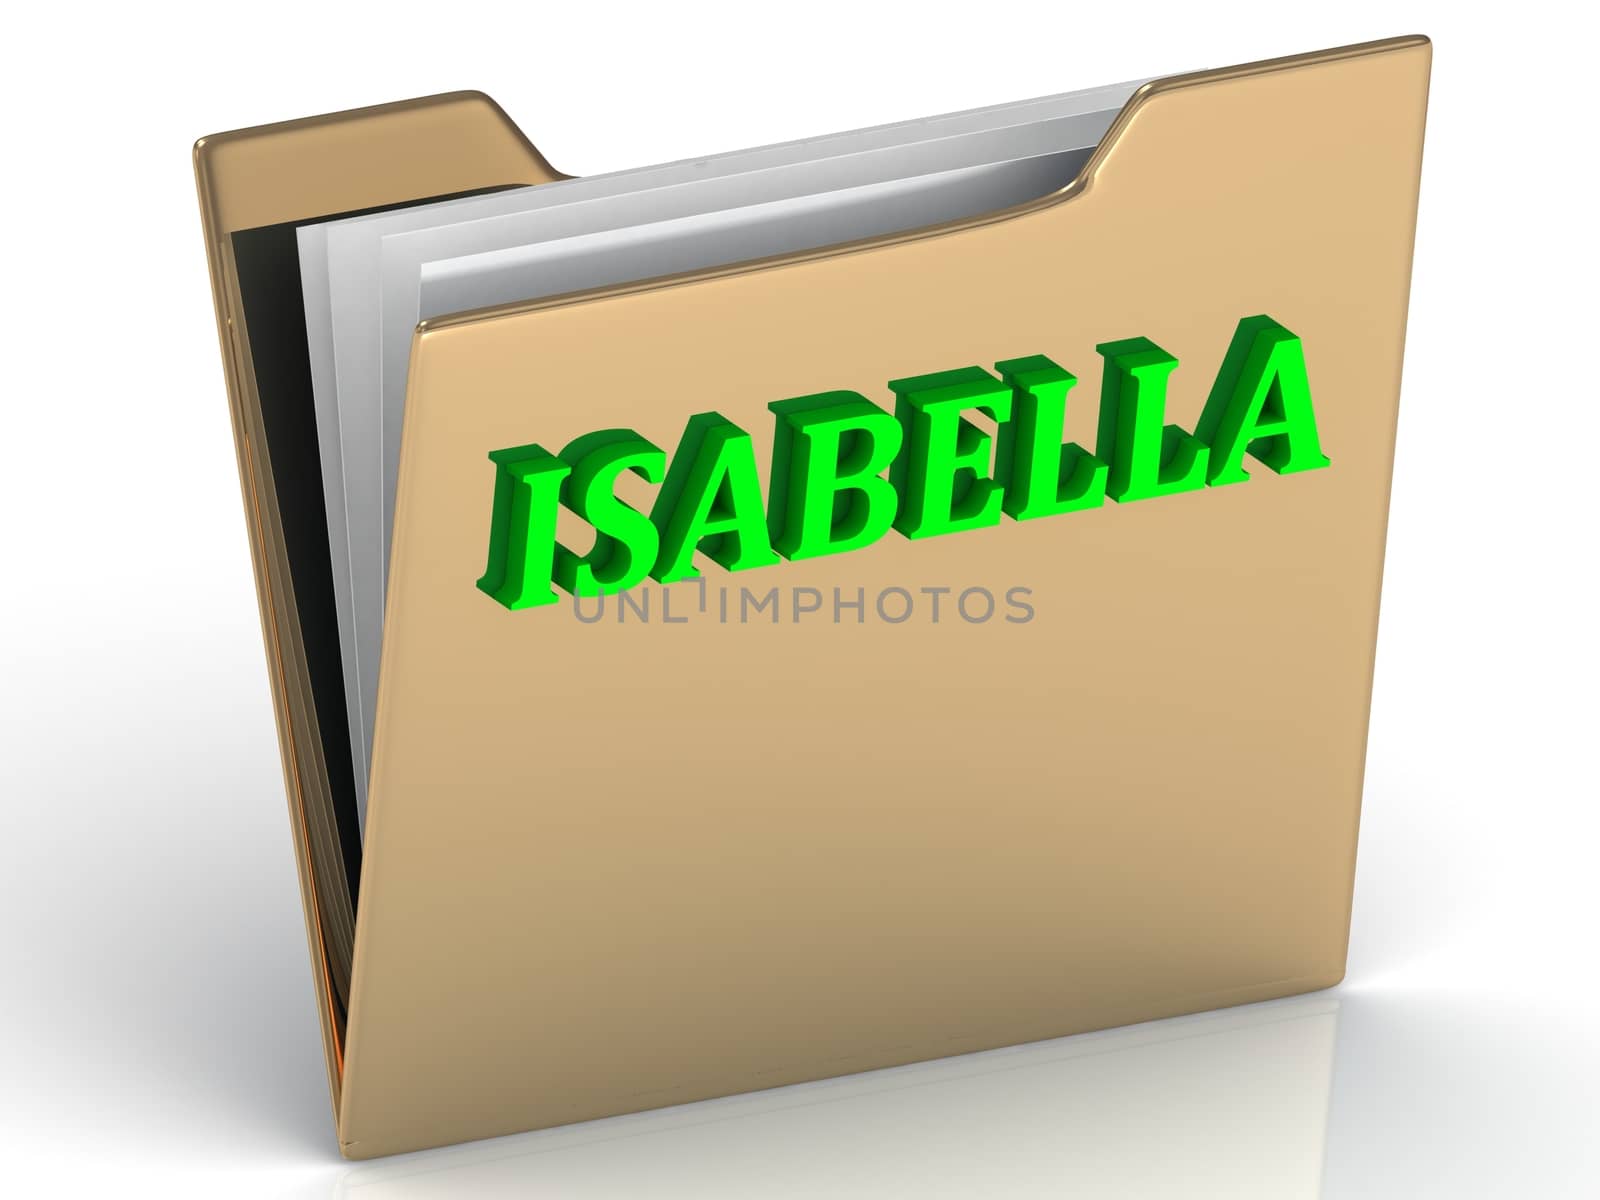 ISABELLA- bright green letters on gold paperwork folder by GreenMost